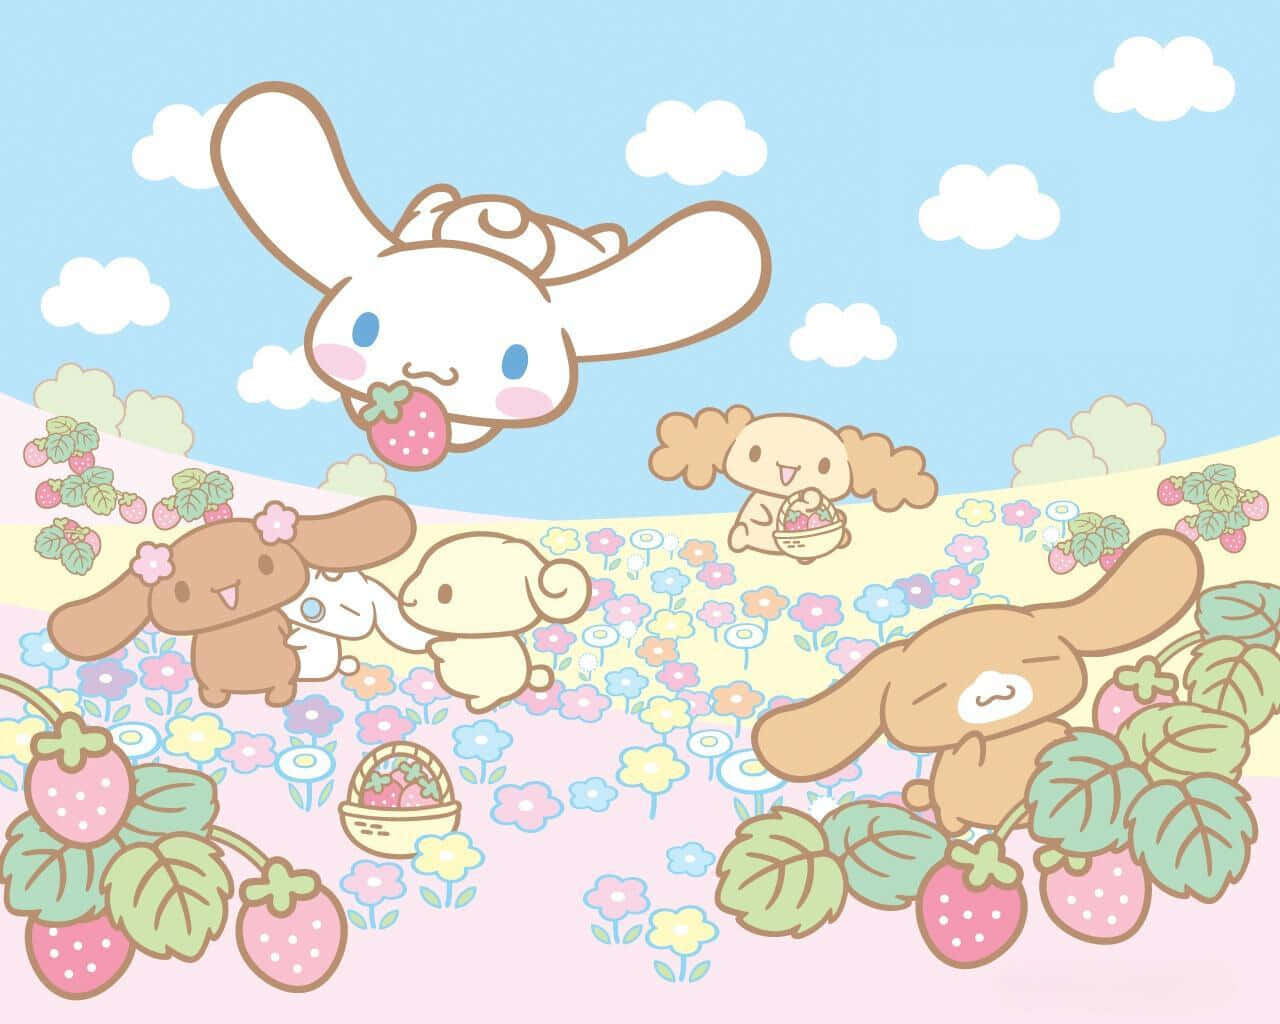 Enter the world of Sanrio to explore a delightful array of characters and stories.